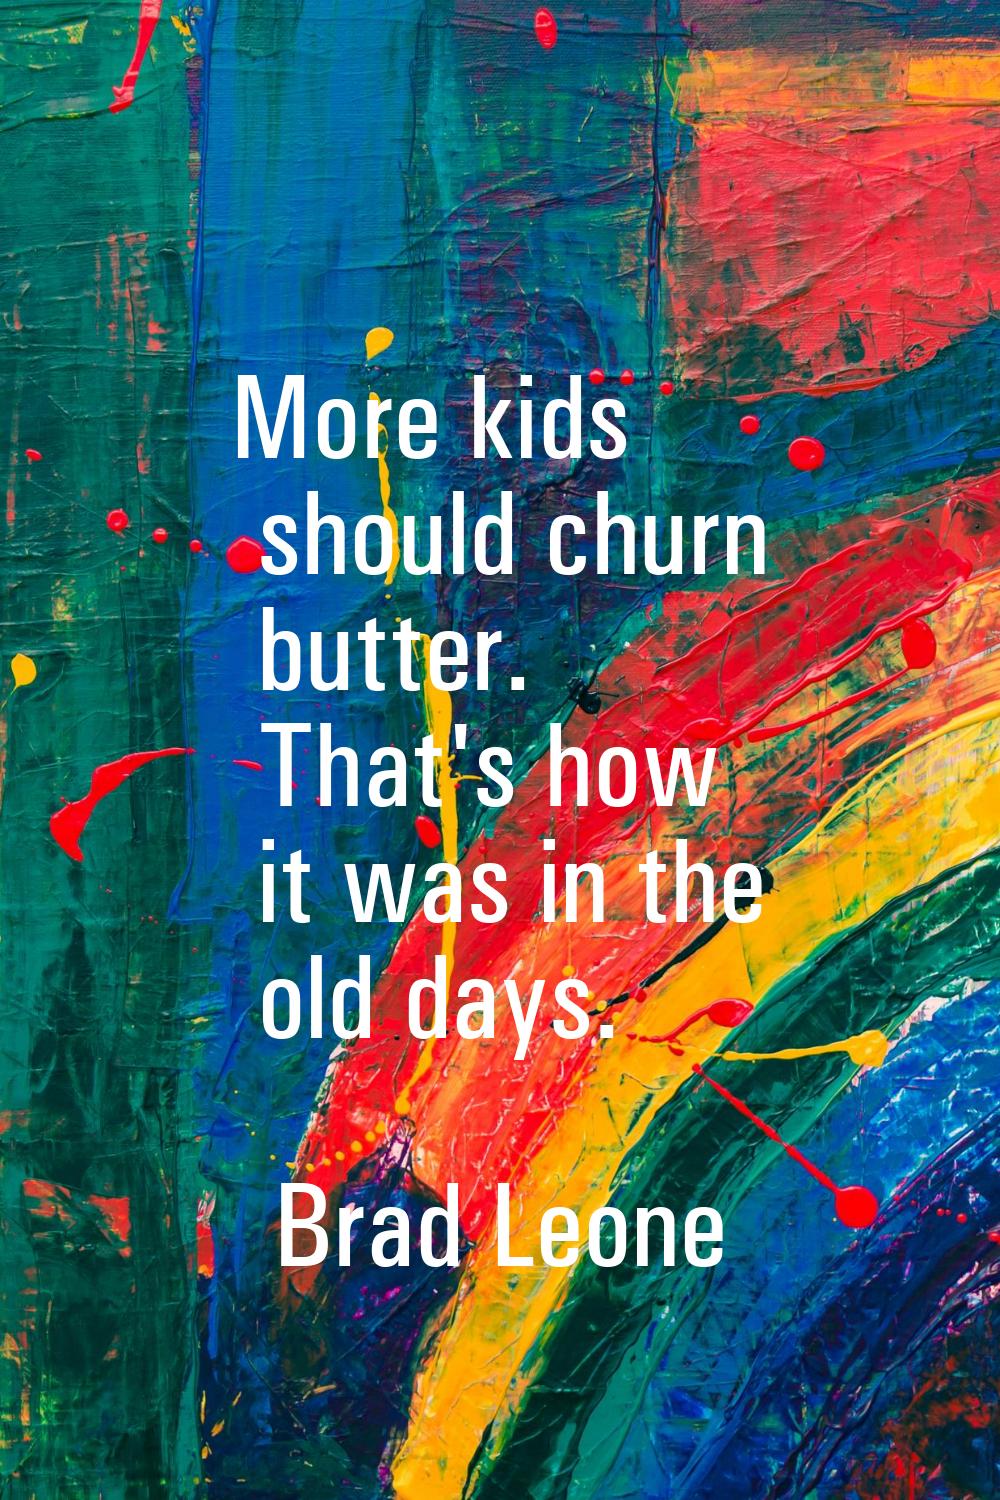 More kids should churn butter. That's how it was in the old days.